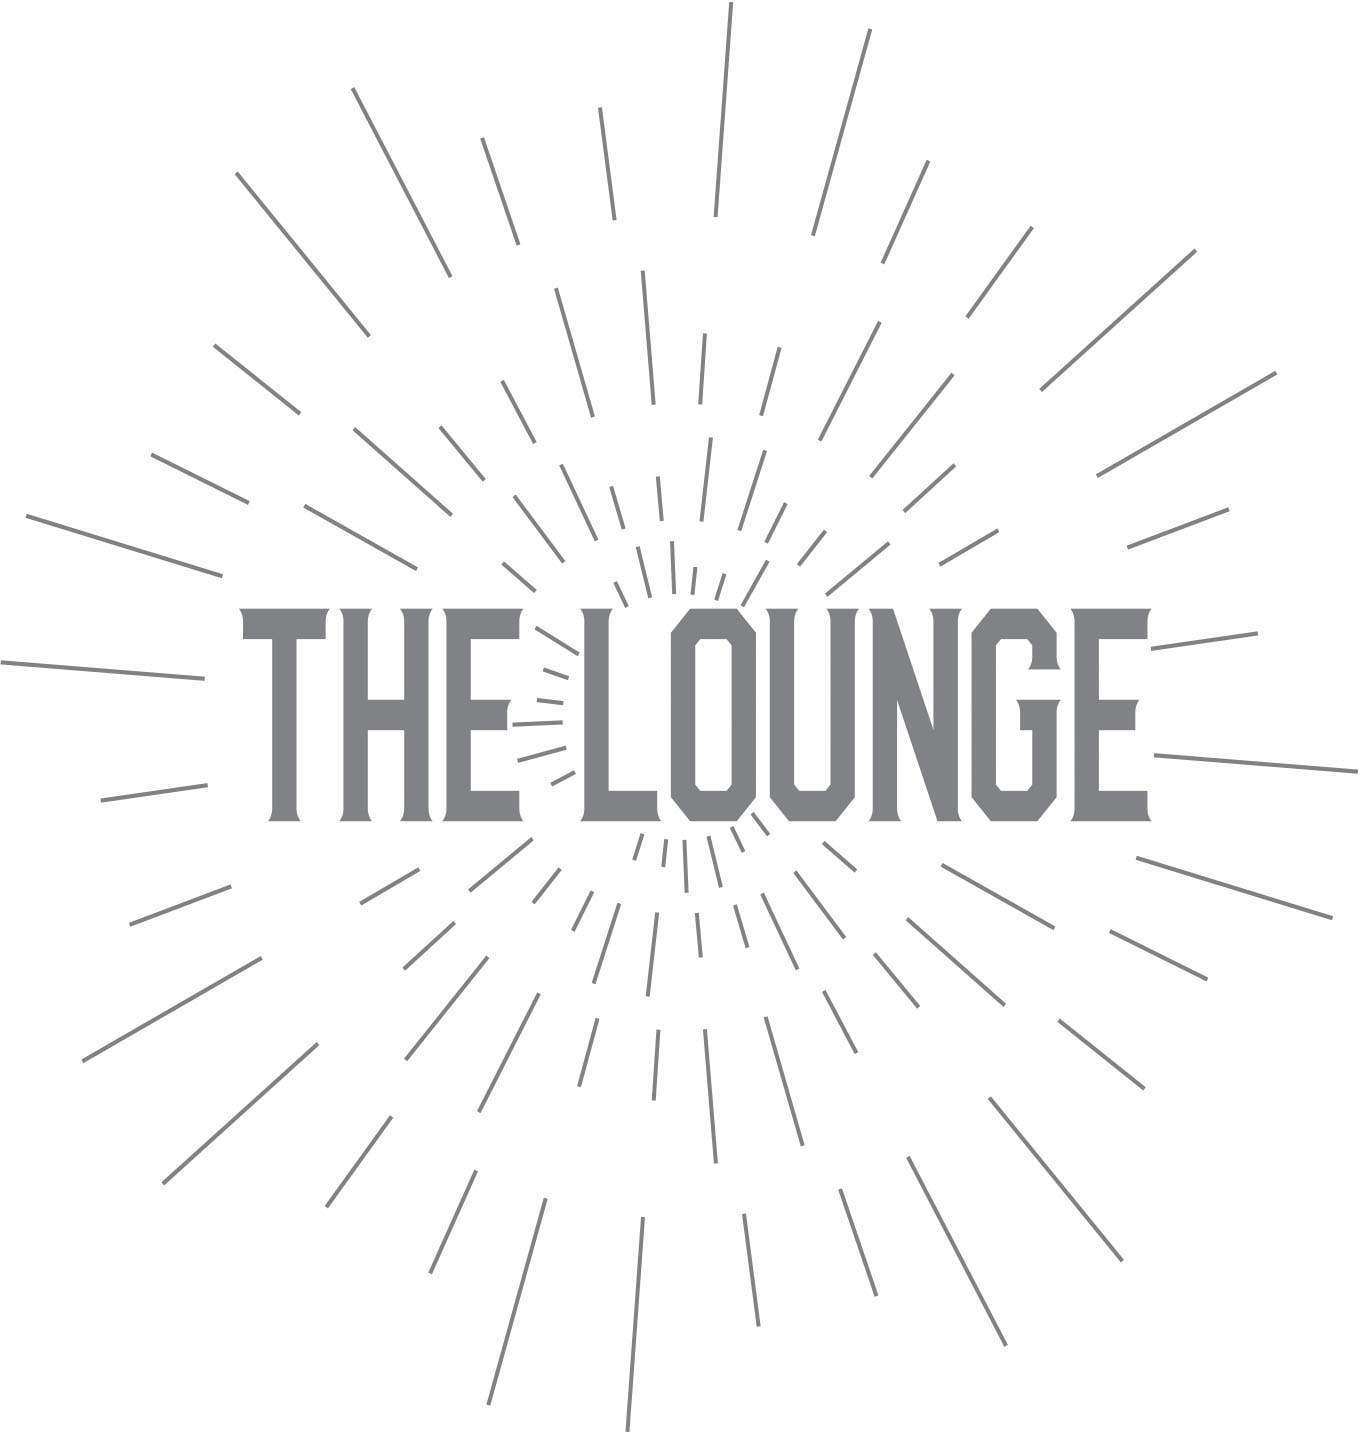 queence Wandtattoo »THE LOUNGE«, (1 St.) von queence